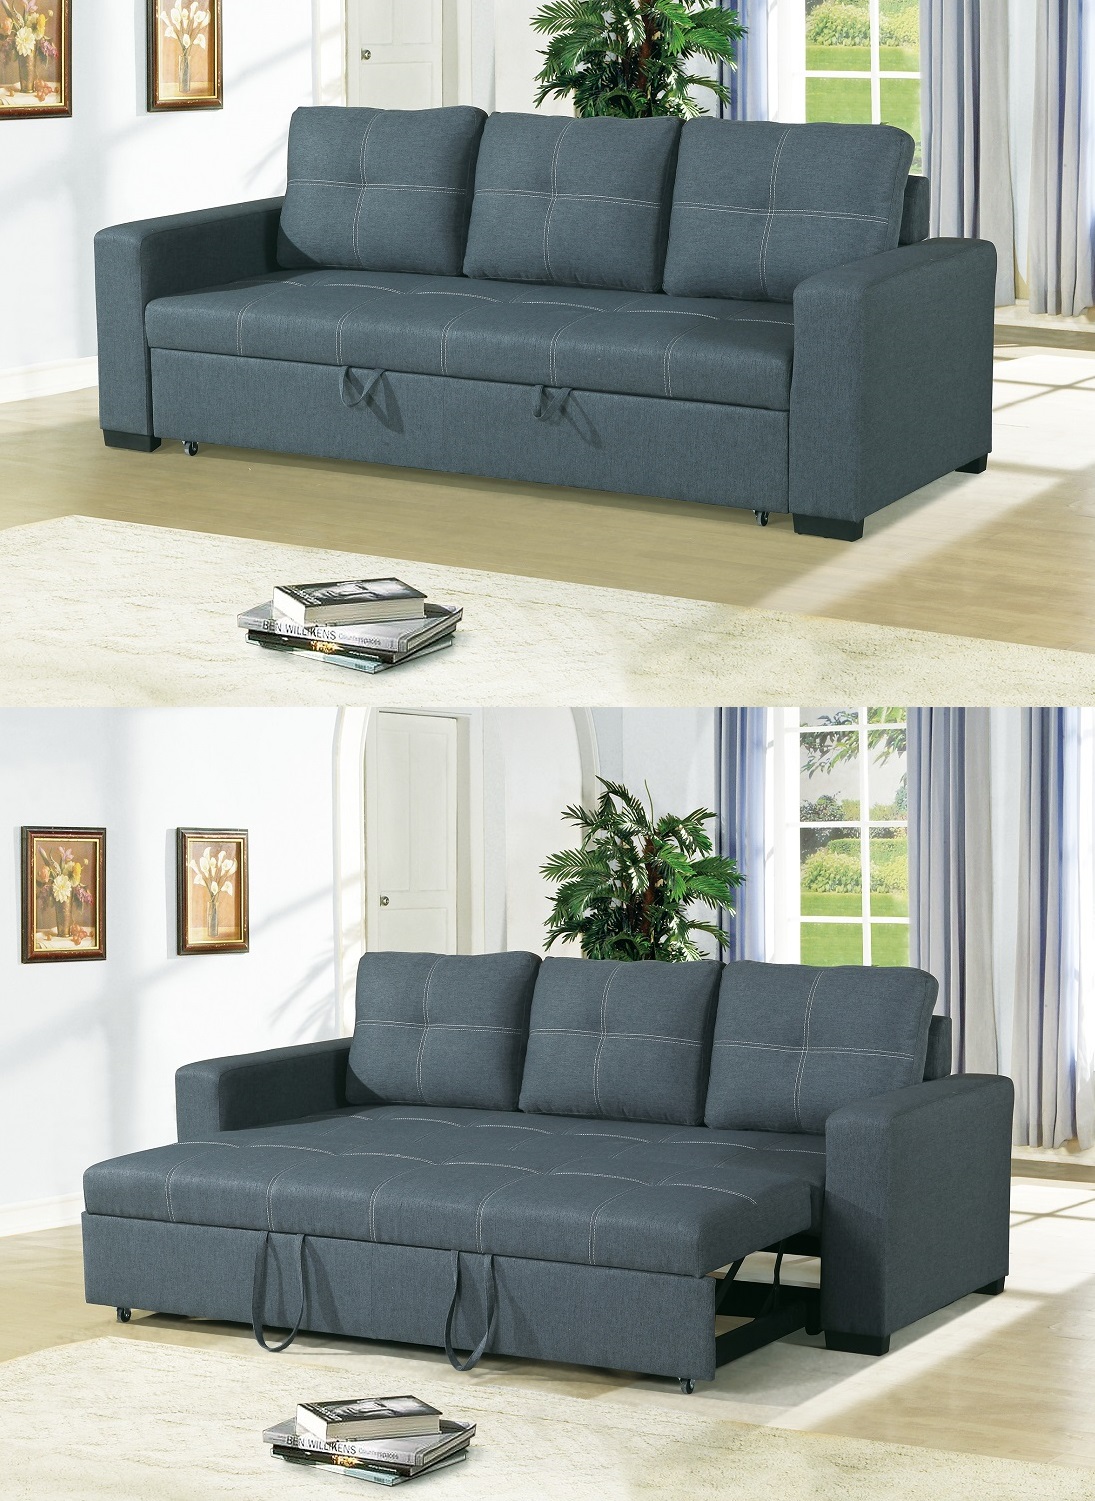 Convertible Sofa Bed Bobkona Living Room Sofa w Pull out Bed Accent Stitching Comfort Couch Blue Grey Polyfiber - image 5 of 5